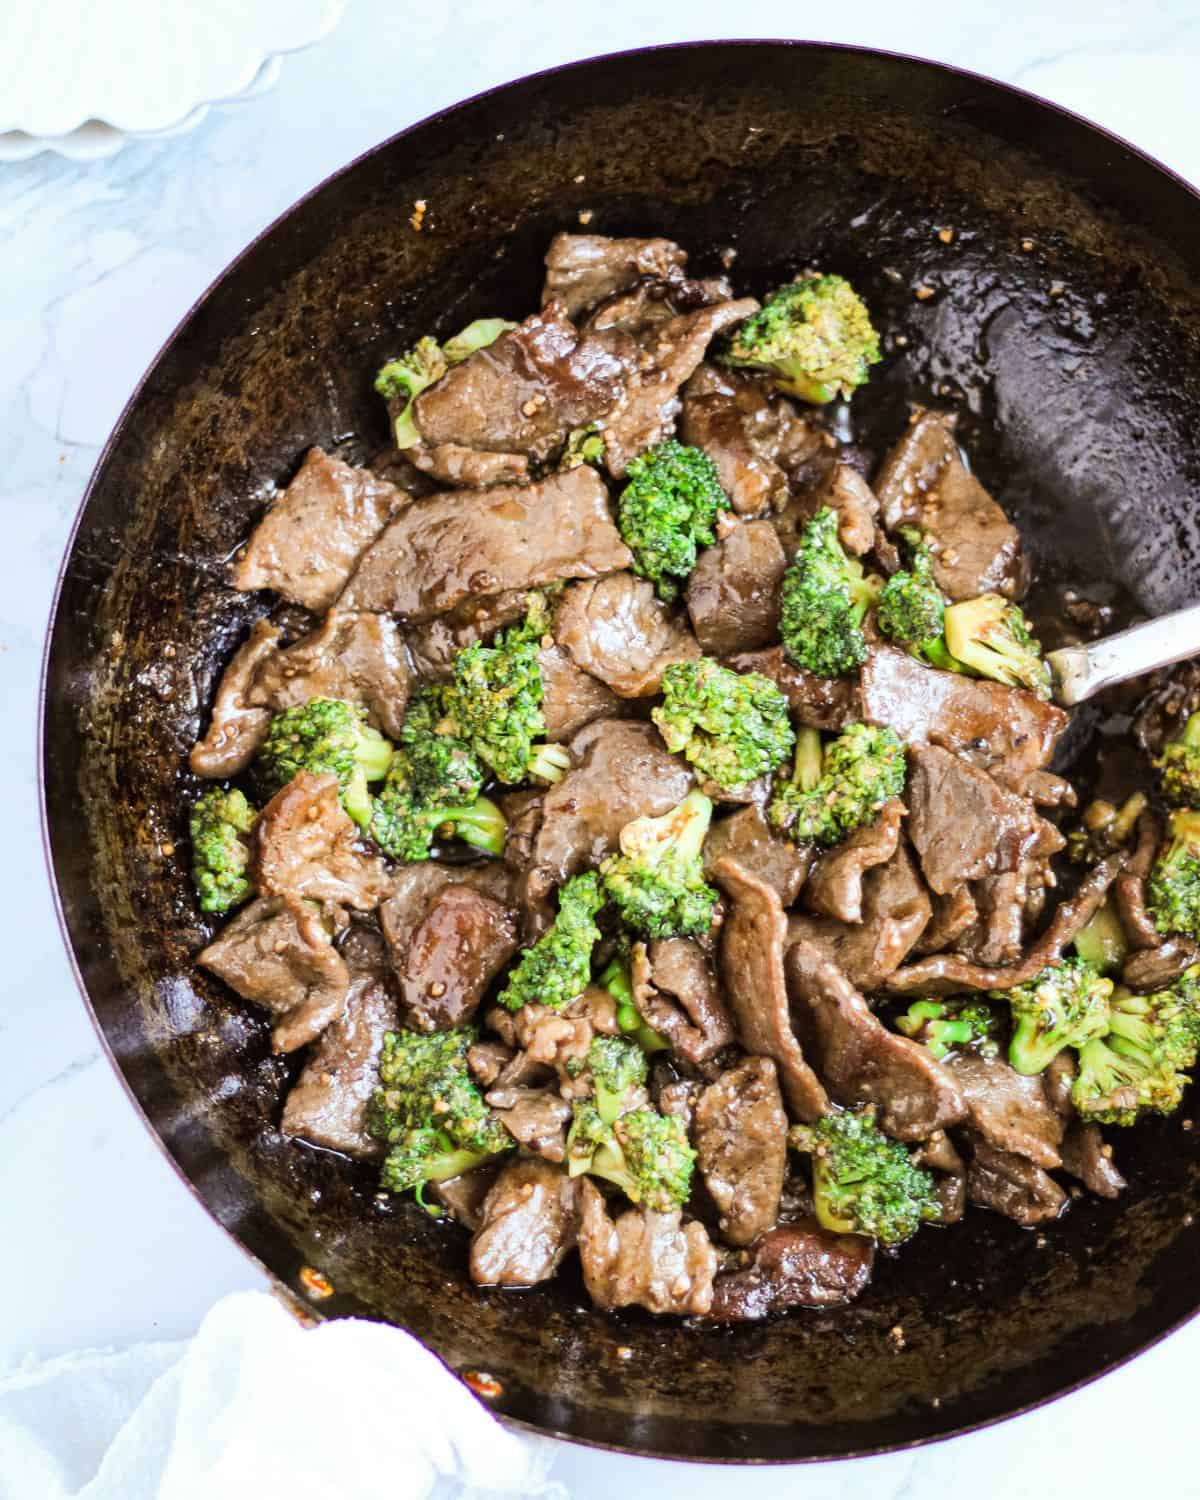 Finish dish of beef and broccoli in a wok, ready to serve.